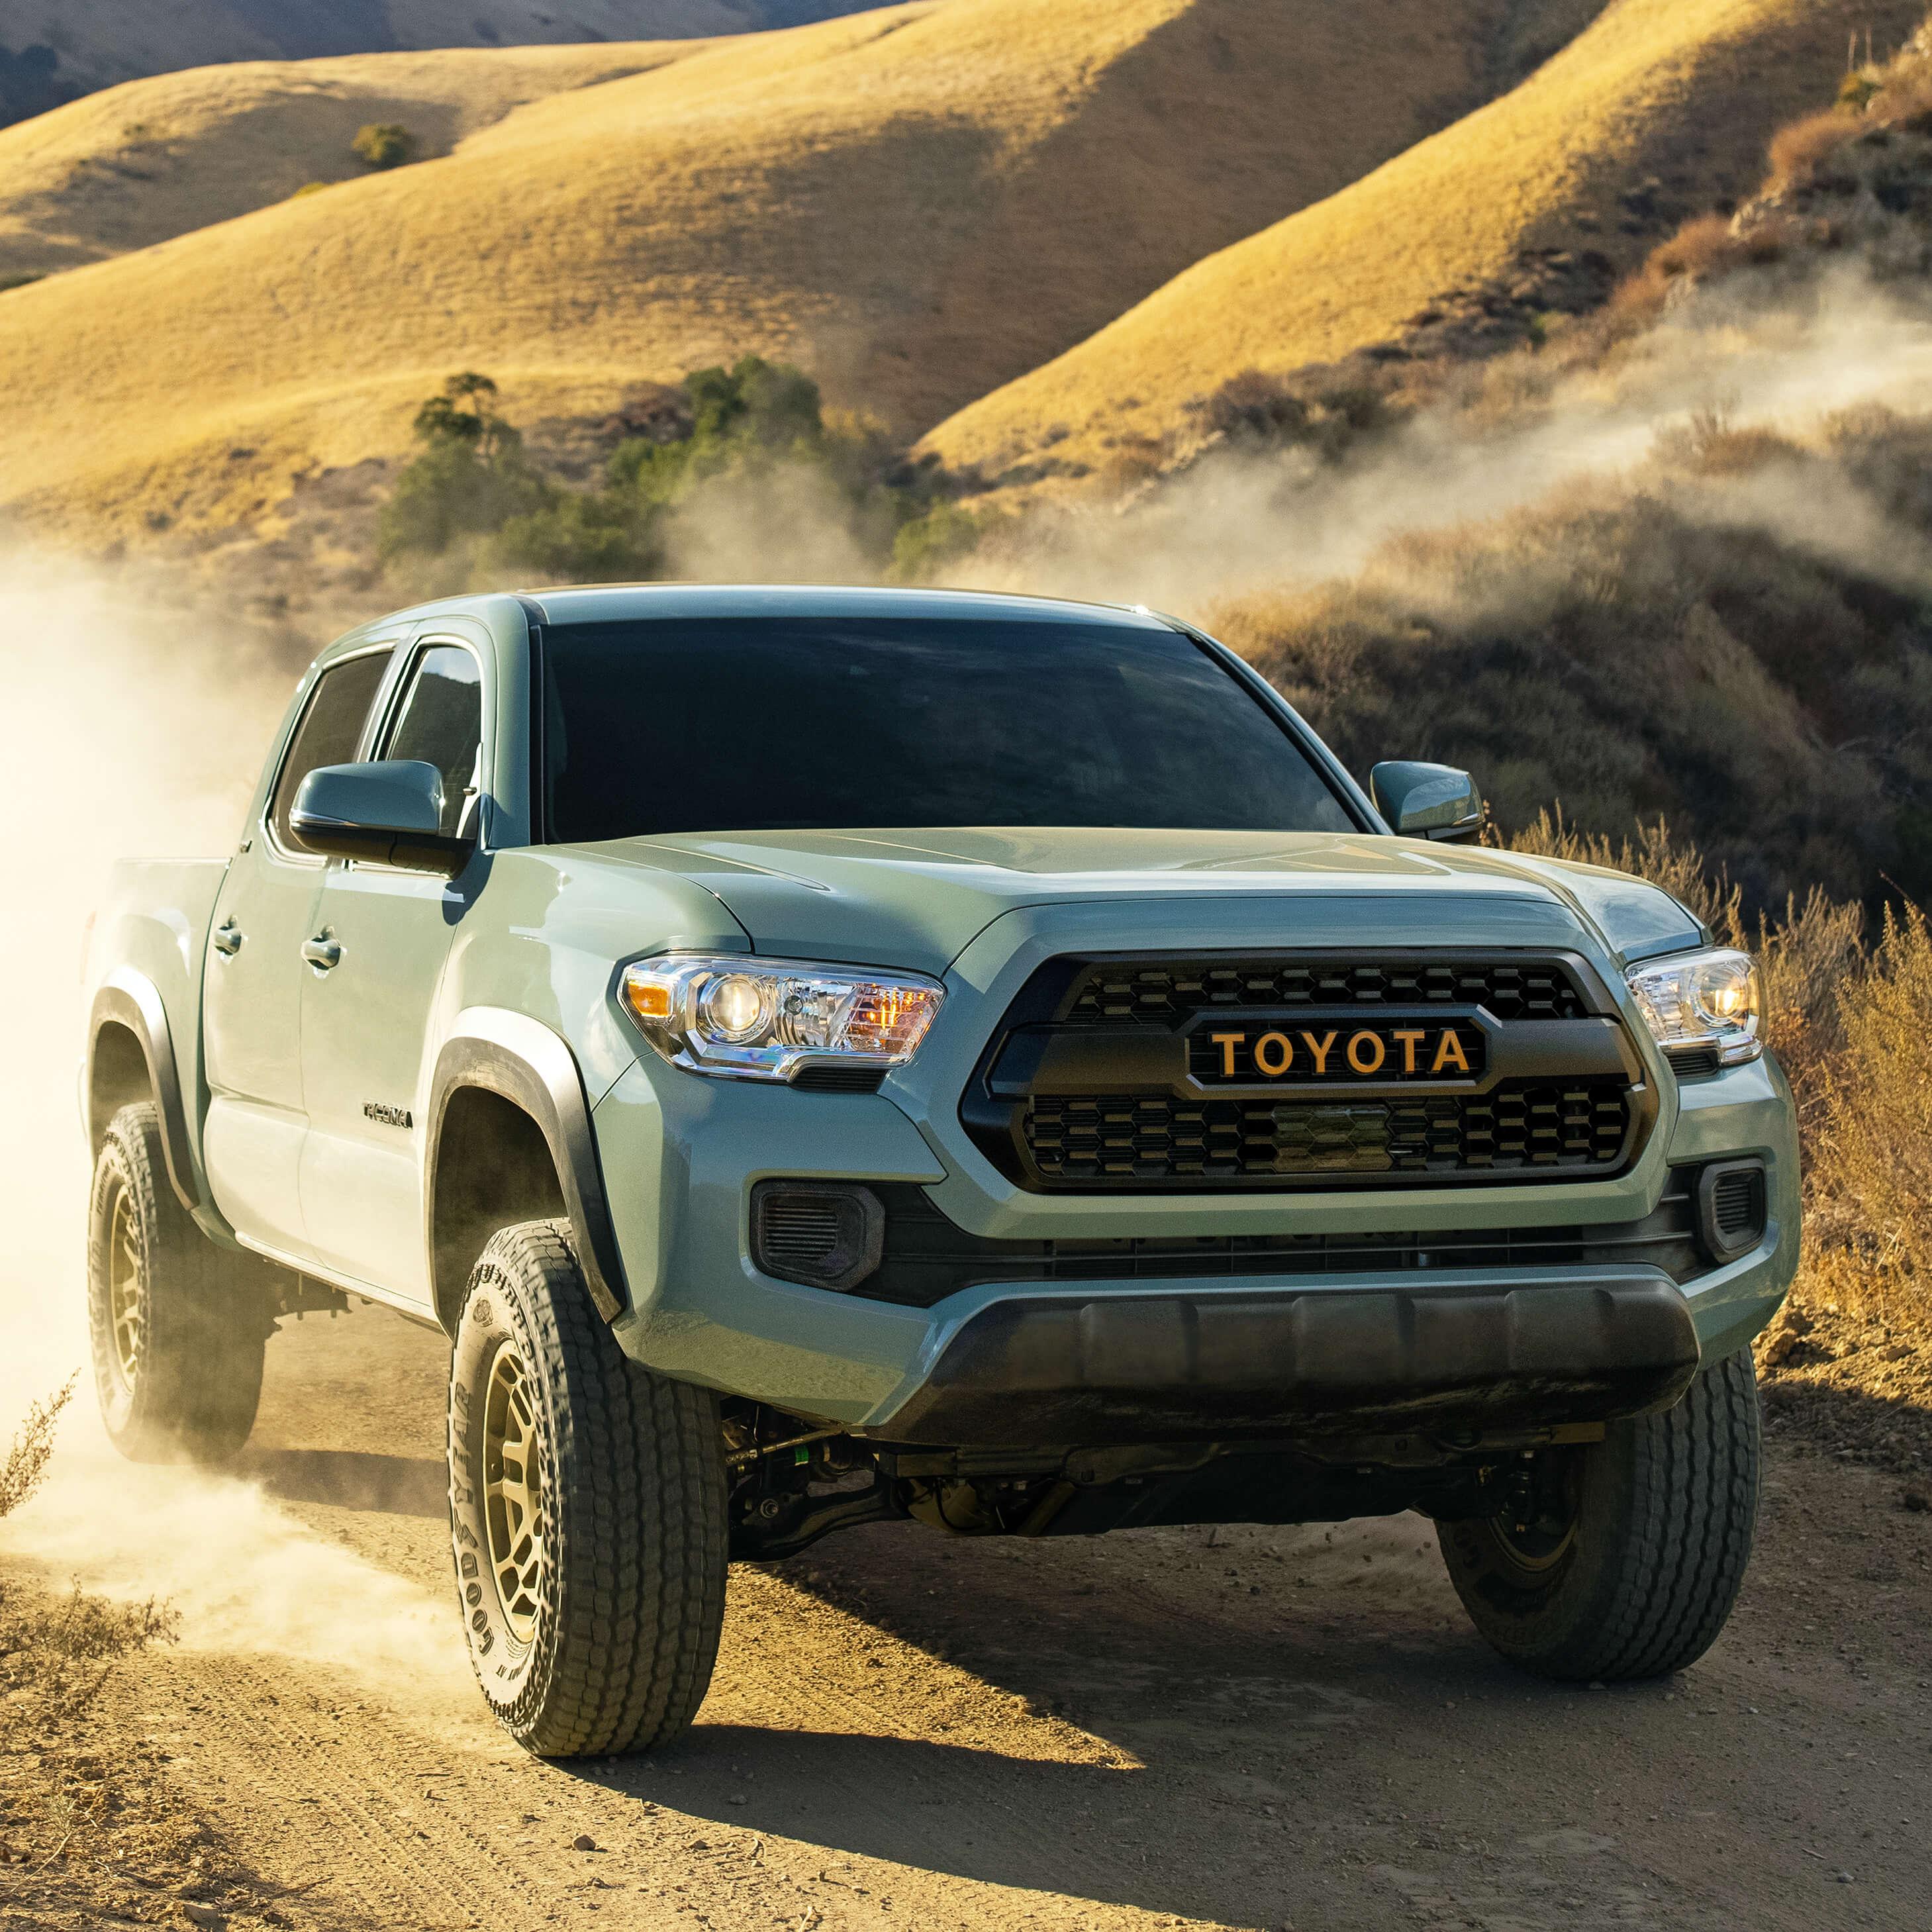 Toyota Tacoma driving down a dusty mountain road